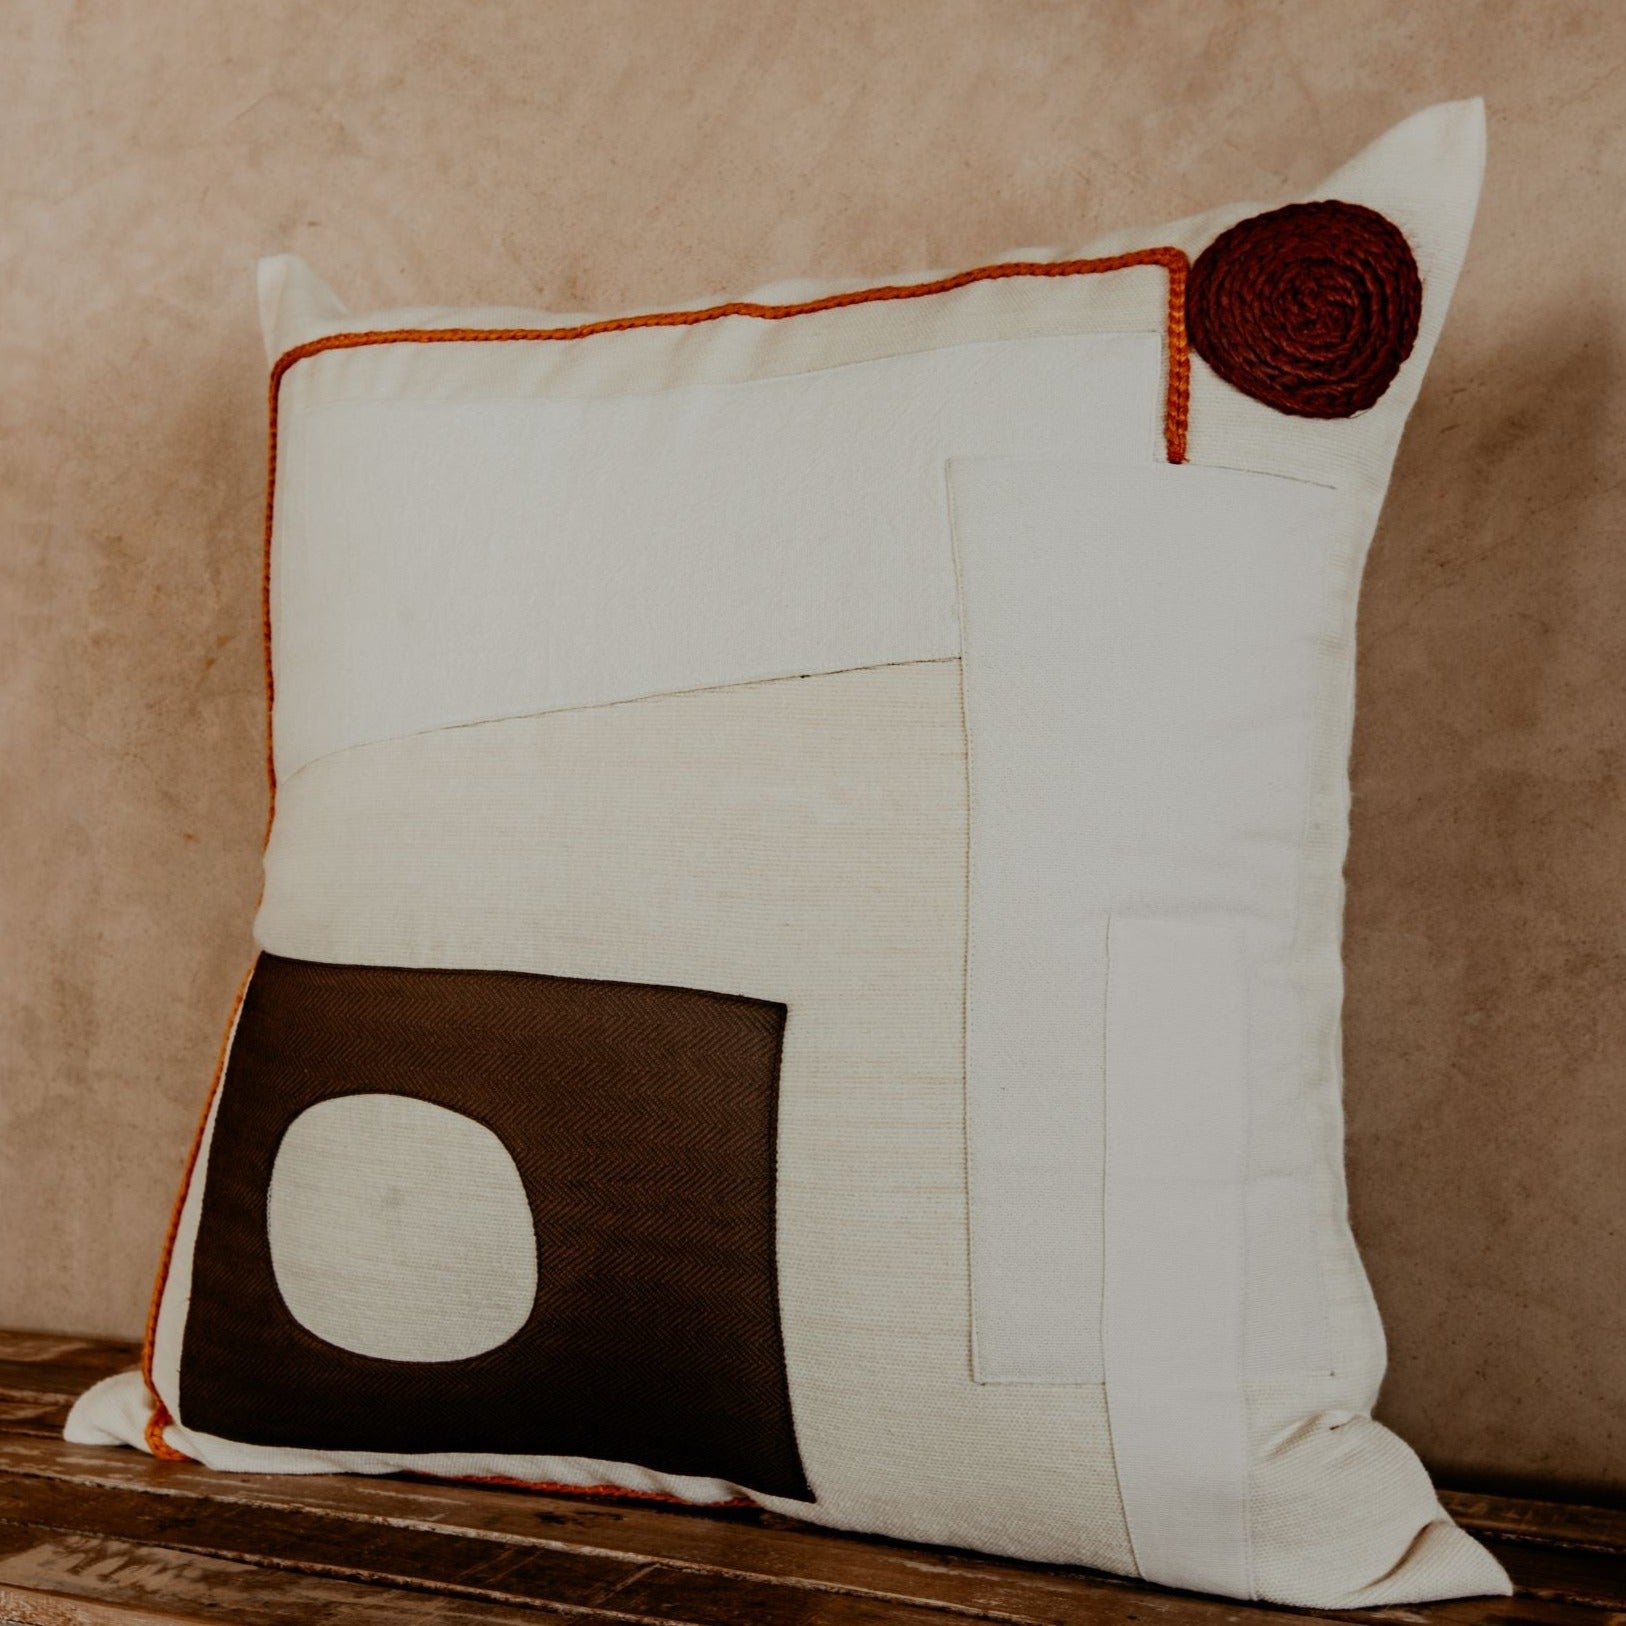 The asymmetric geometric blocks make this pillow a true boho accent piece. Hand-loomed by expert artisans, the different shapes bring an artsy look and extra coziness to your bed, sofa or chaise.